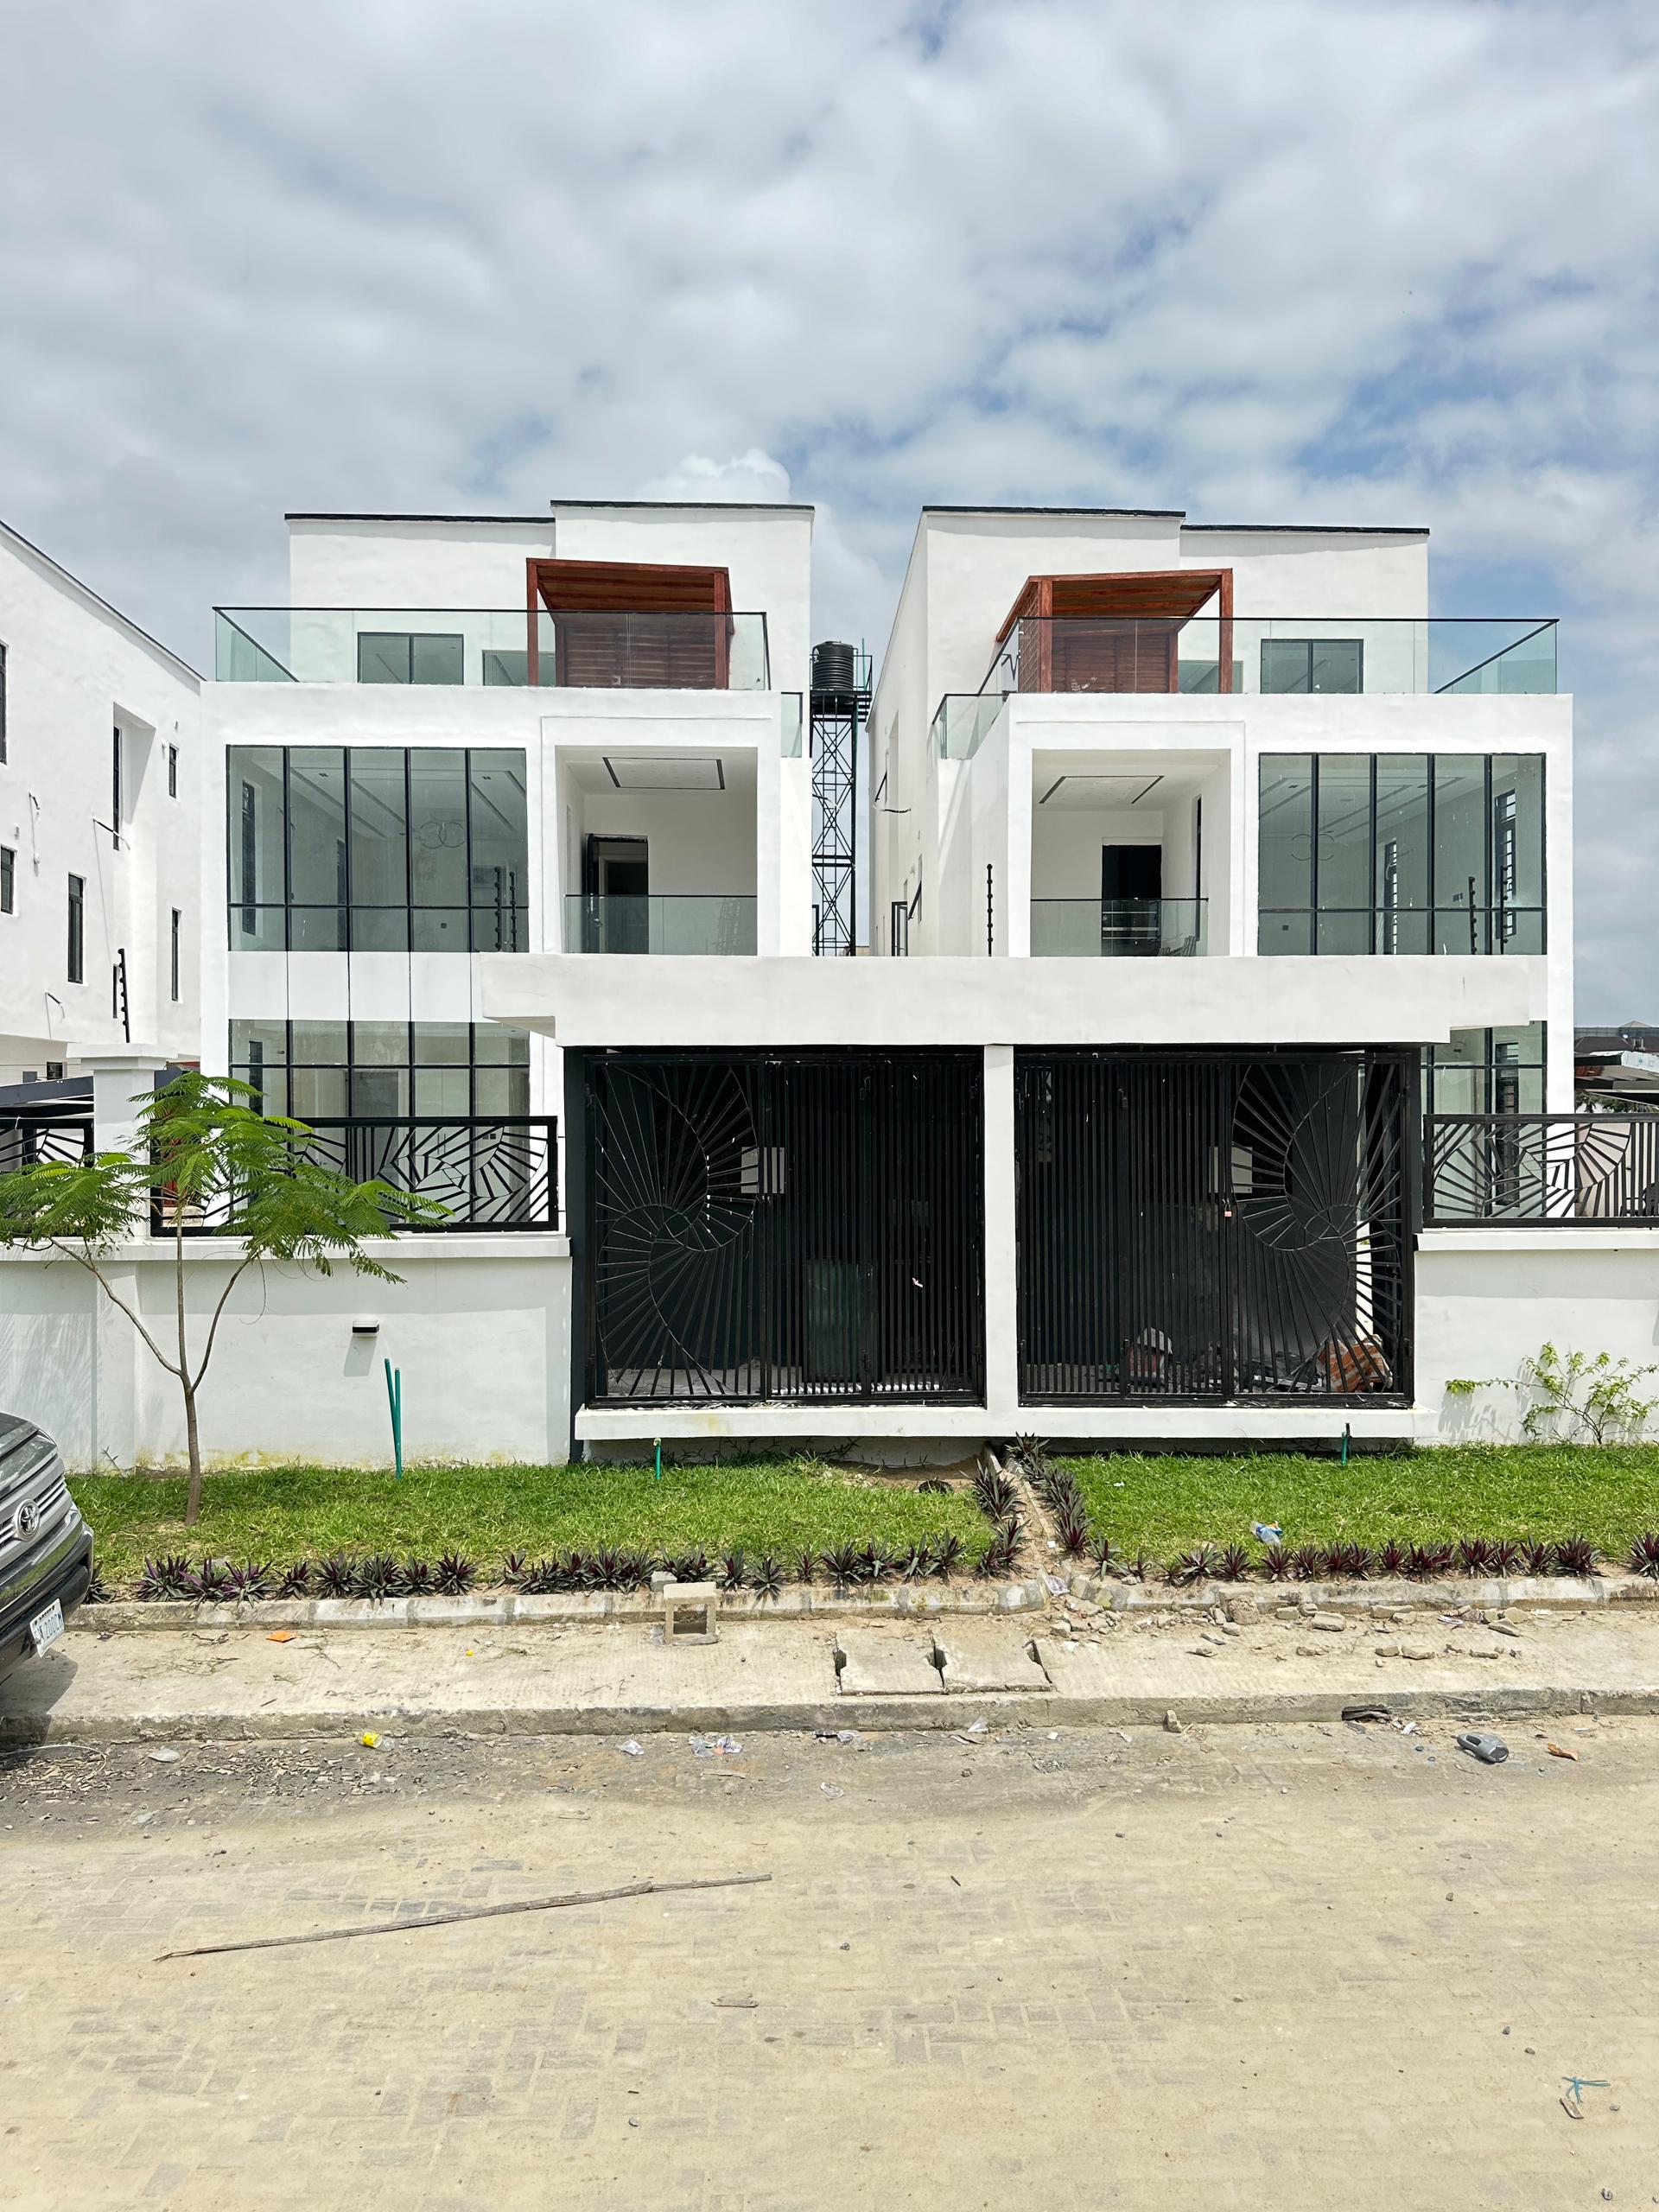 LUXURY 5 BEDROOM FULLY DETACHED HOME WITH SWIMMING POOL, PRIVATE CINEMA AND A ROOFTOP TERRACE IN A WELL SECURED ESTATE IN LEKKI PHASE 1.